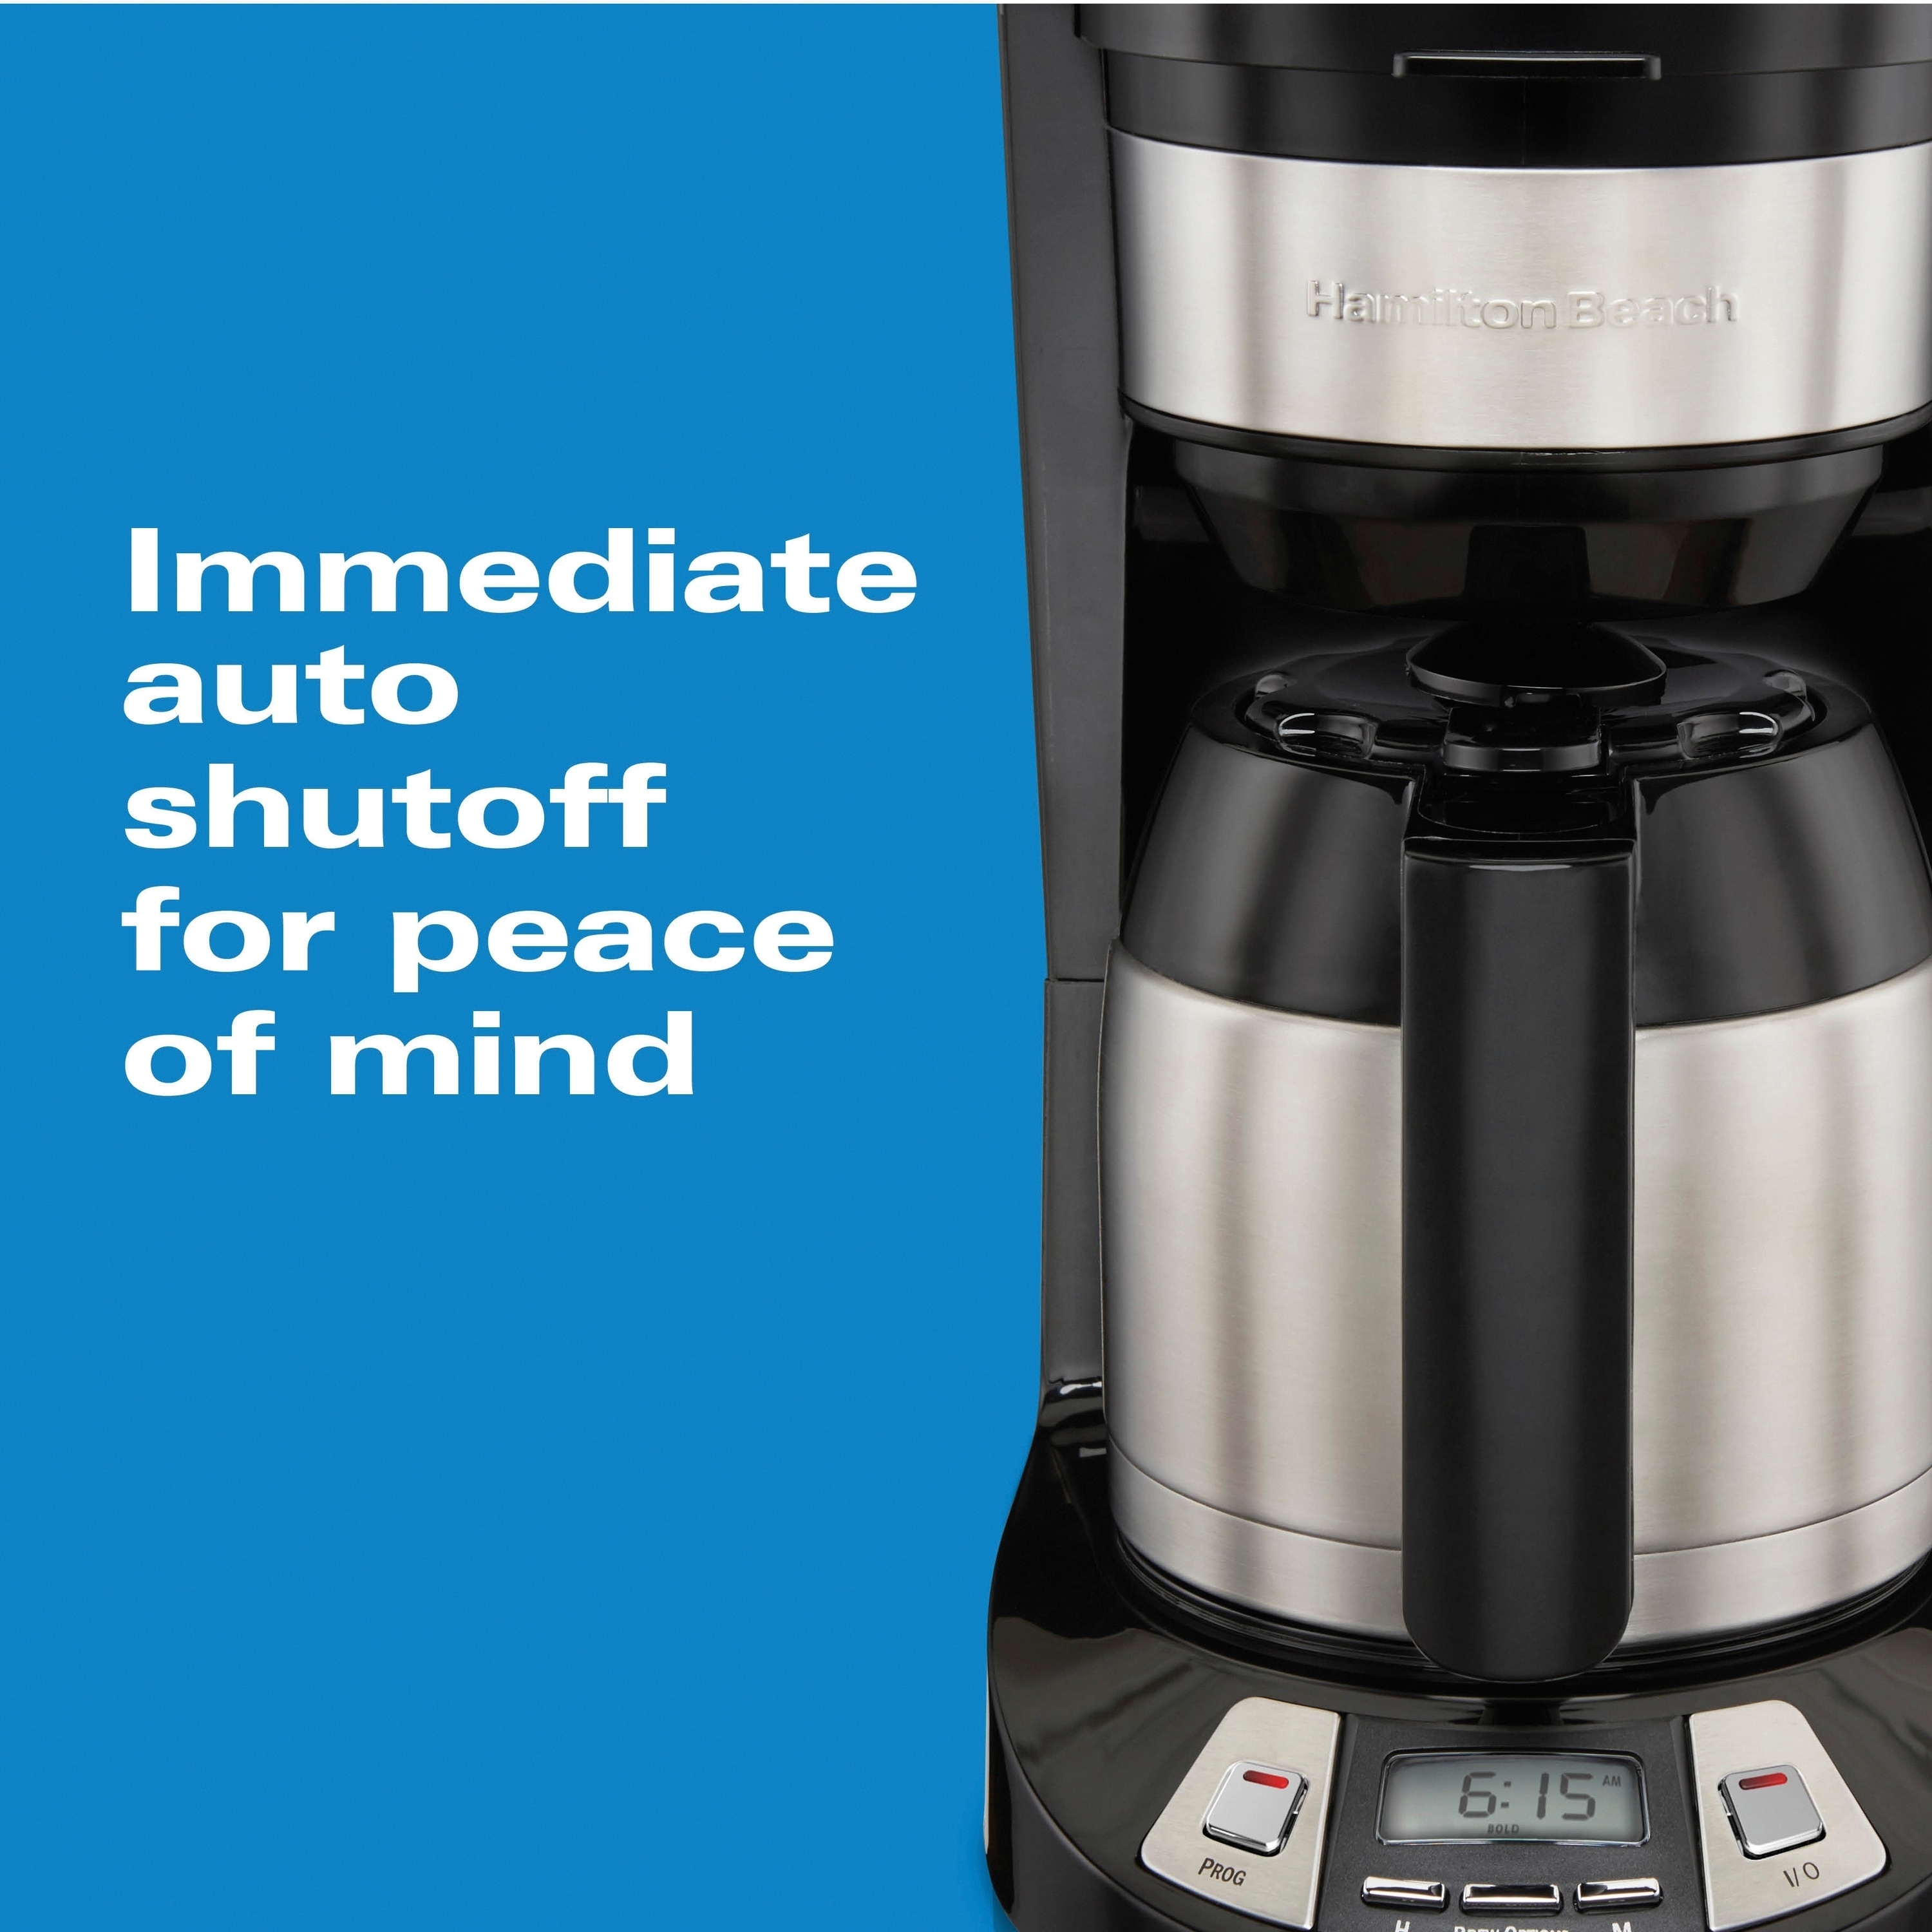 https://ak1.ostkcdn.com/images/products/30970355/Hamilton-Beach-8-Cup-Programmable-Coffee-Maker-with-Thermal-Carafe-b8afa0a7-b9b4-48dc-a53f-d8ae0969440d.jpg